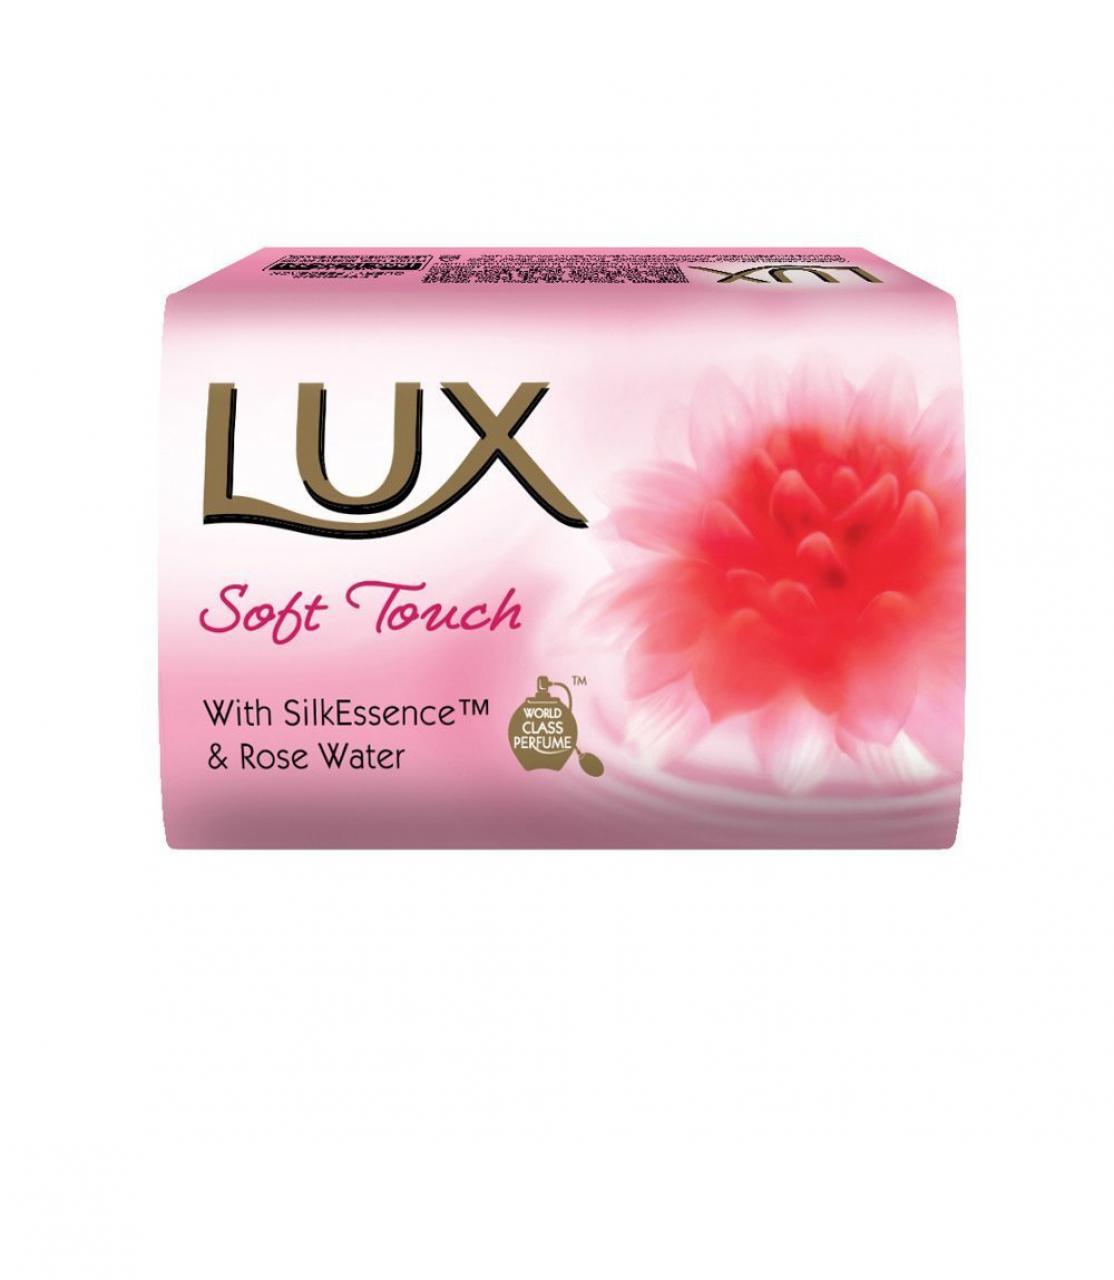 Soap lux soft touch